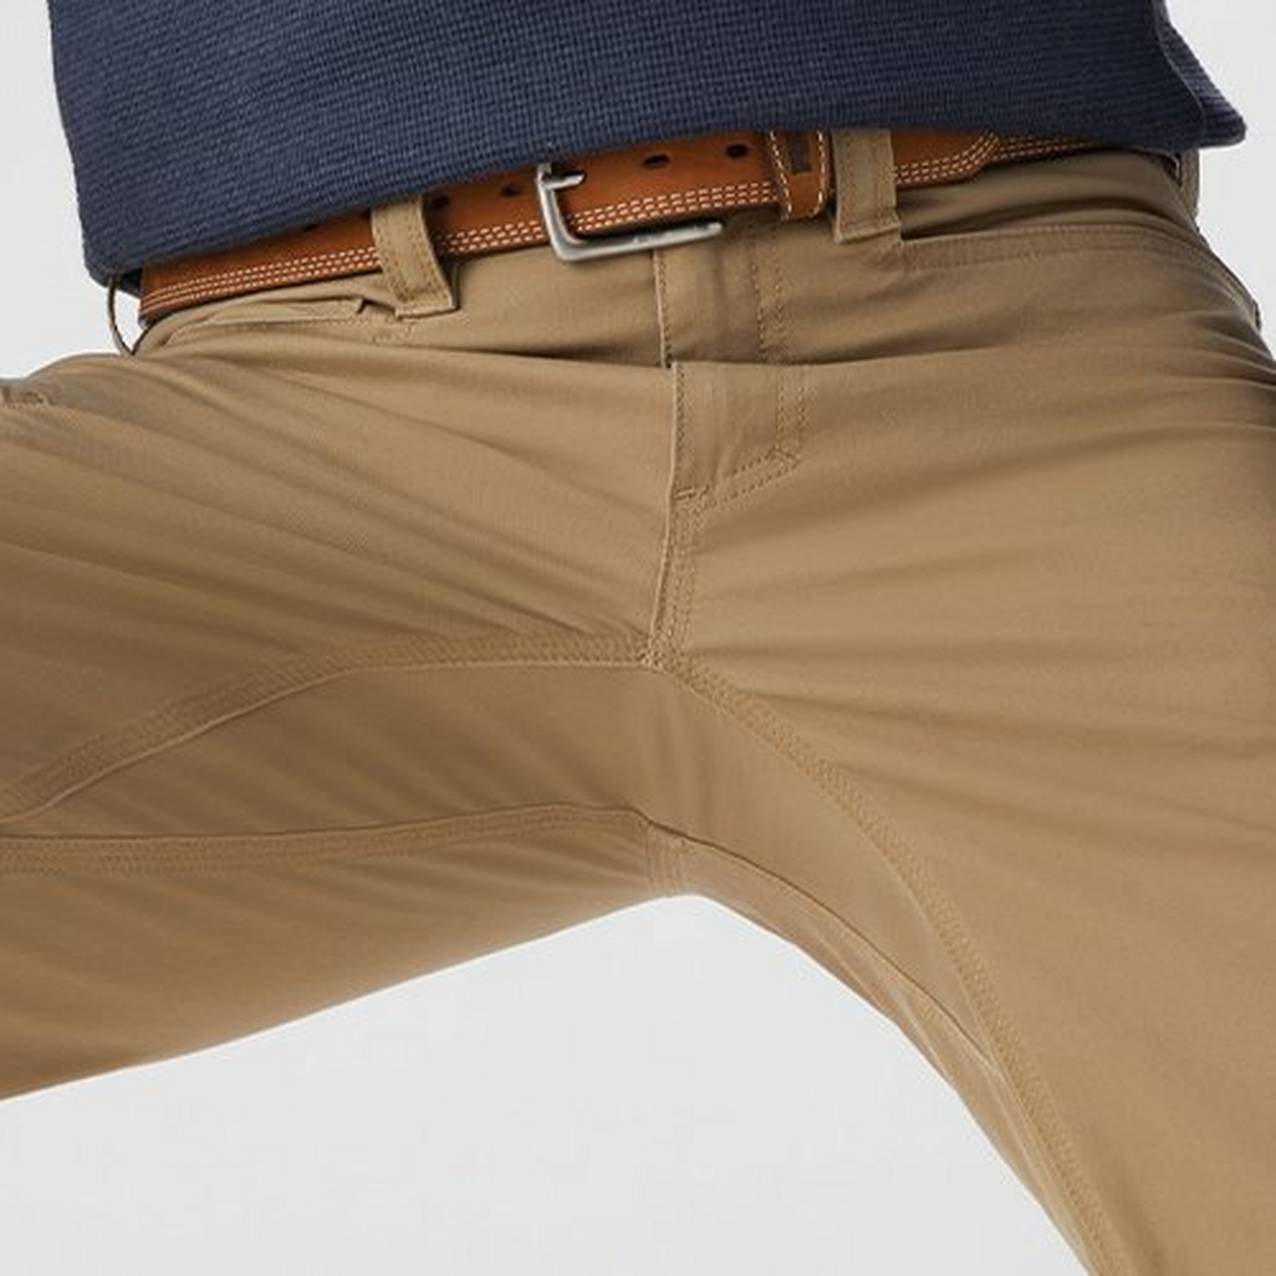 Close up of a man crouching in pants to show the range of motion